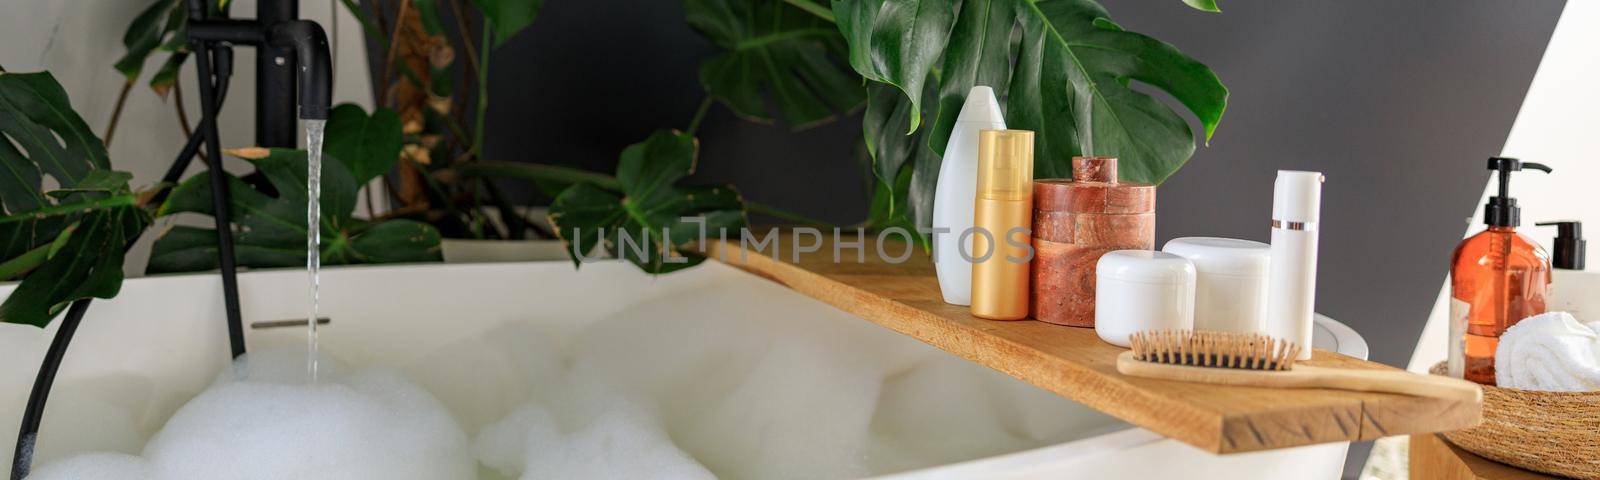 Wooden shelf for beauty and body care products on wooden shelf over modern white bubble filled bathtub. Cozy bathroom decorated with green tropical plant Monstera. Concept of organic cosmetics, spa